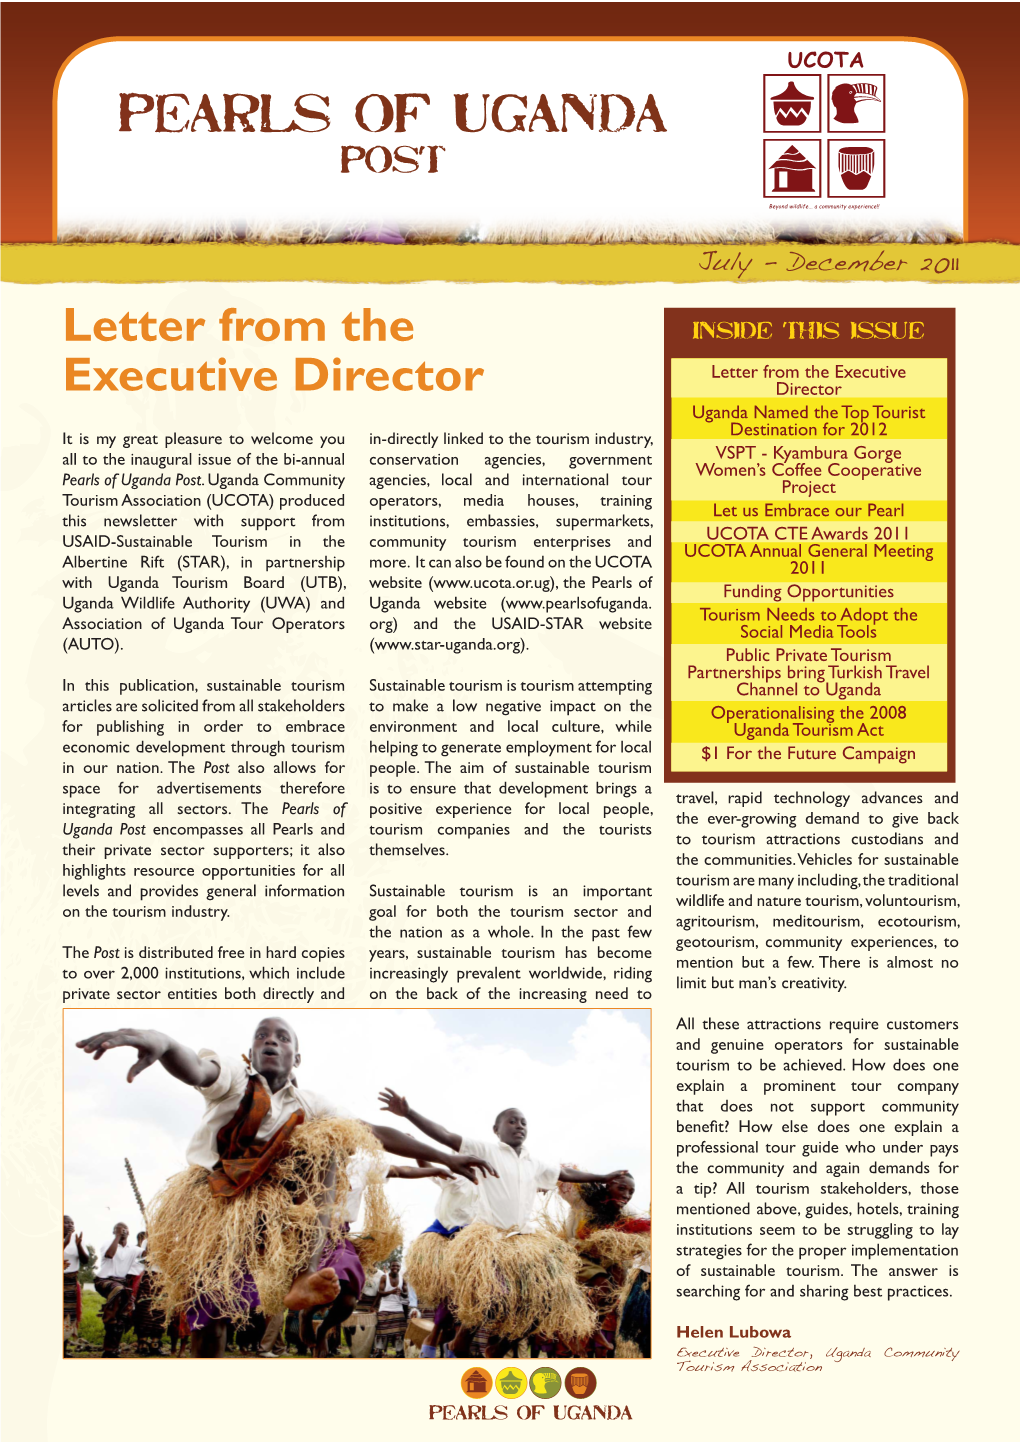 Letter from the Executive Director